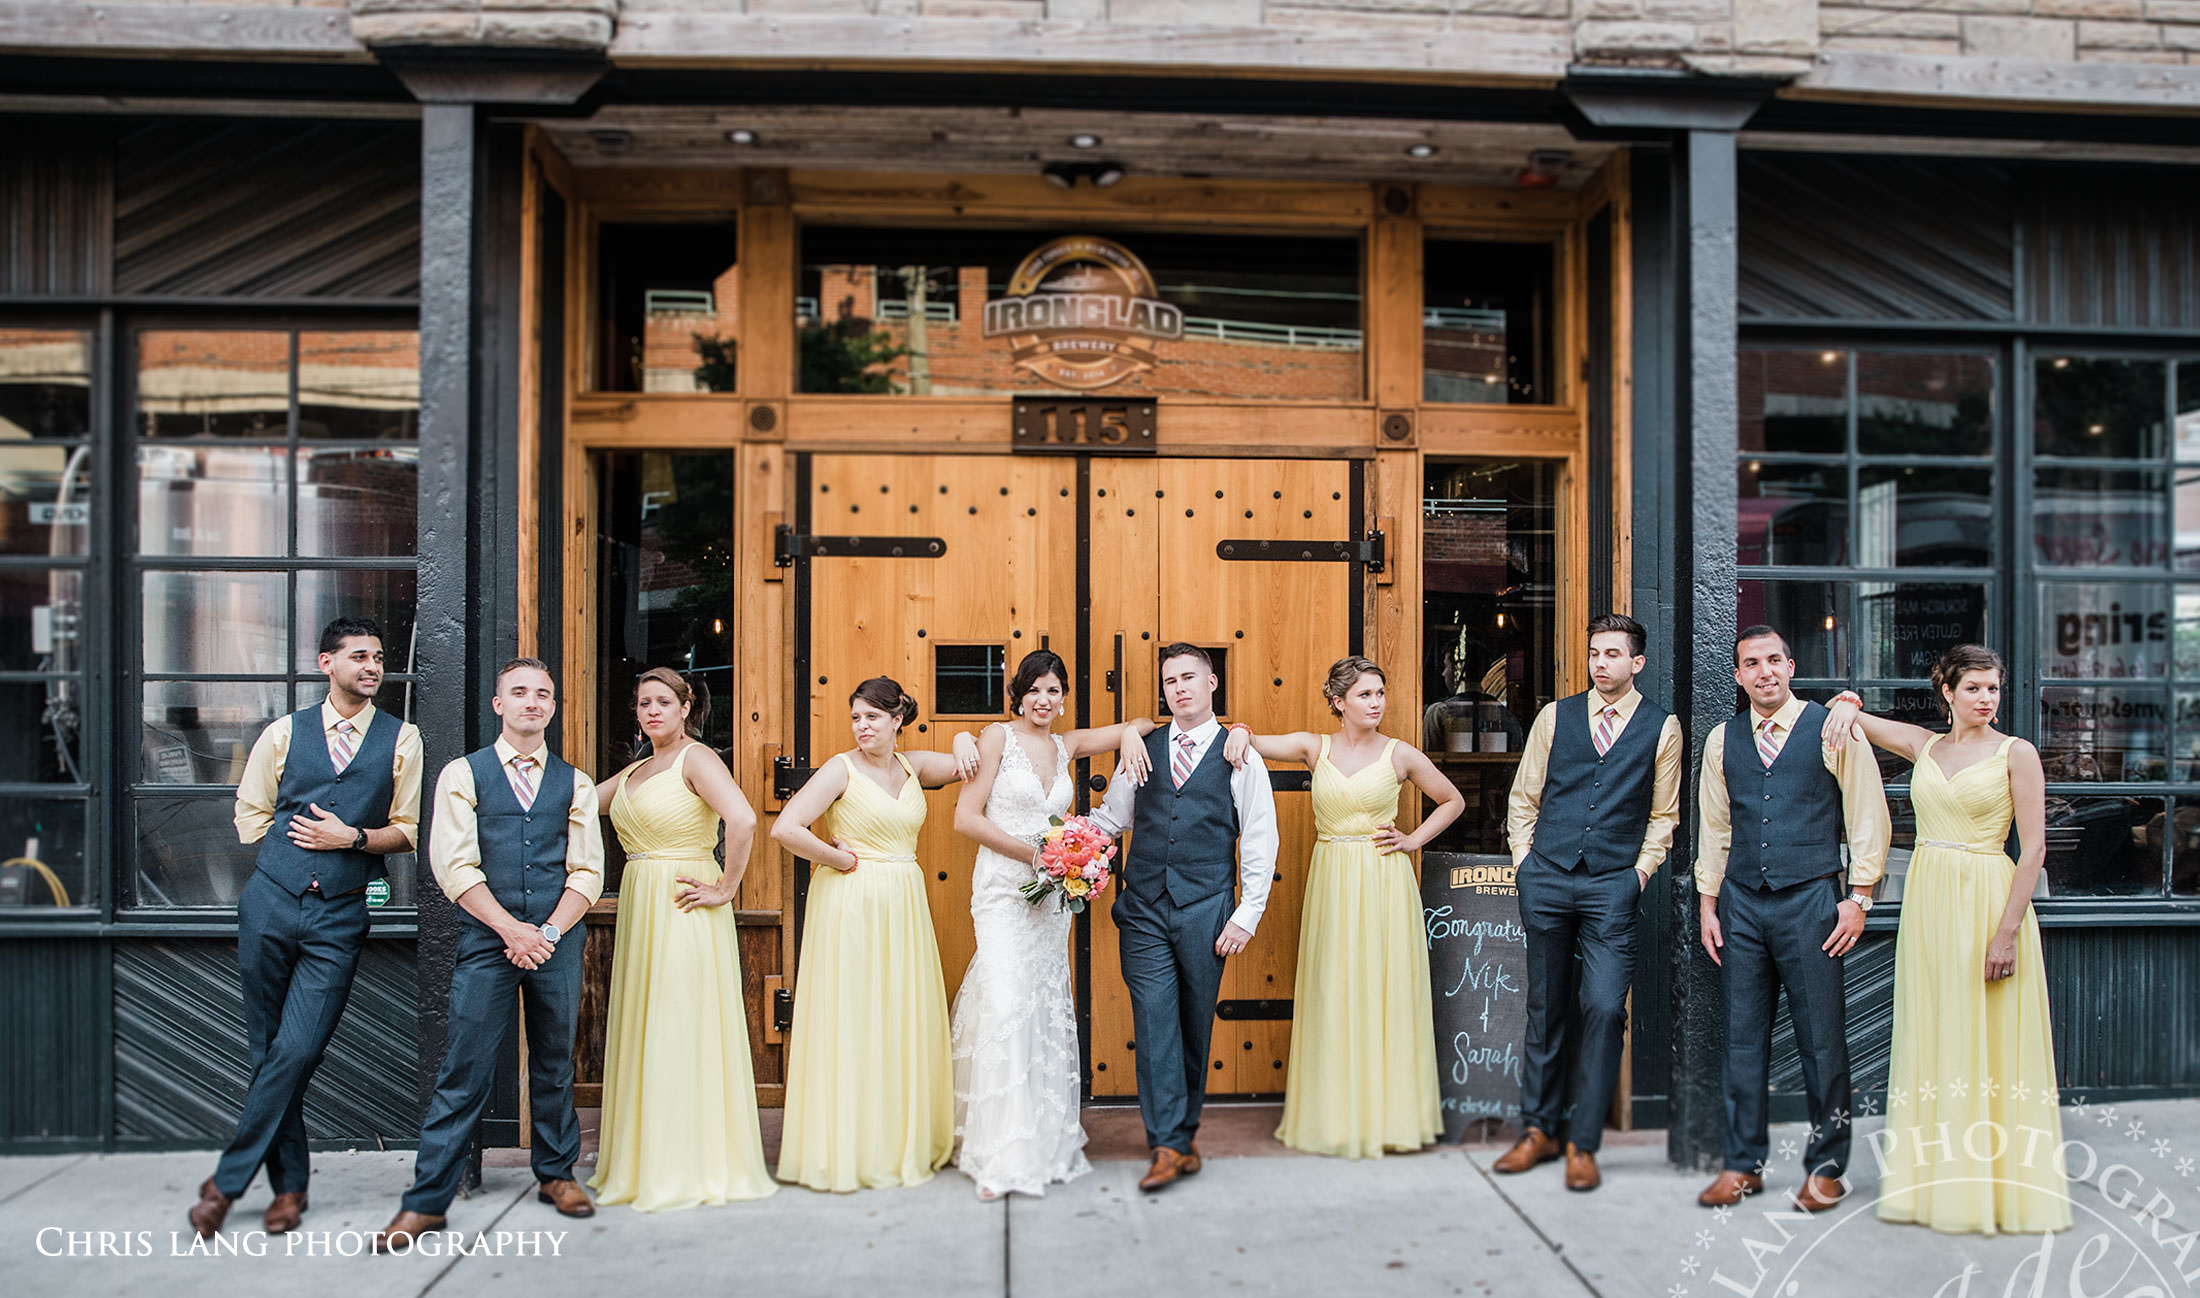 Ironclad Brewery Weddings - bridal party in fron of Ironclad Brewery - weddinfg and reception venue - Wilmington NC - Wedding Photography - Ideas - Inspiration